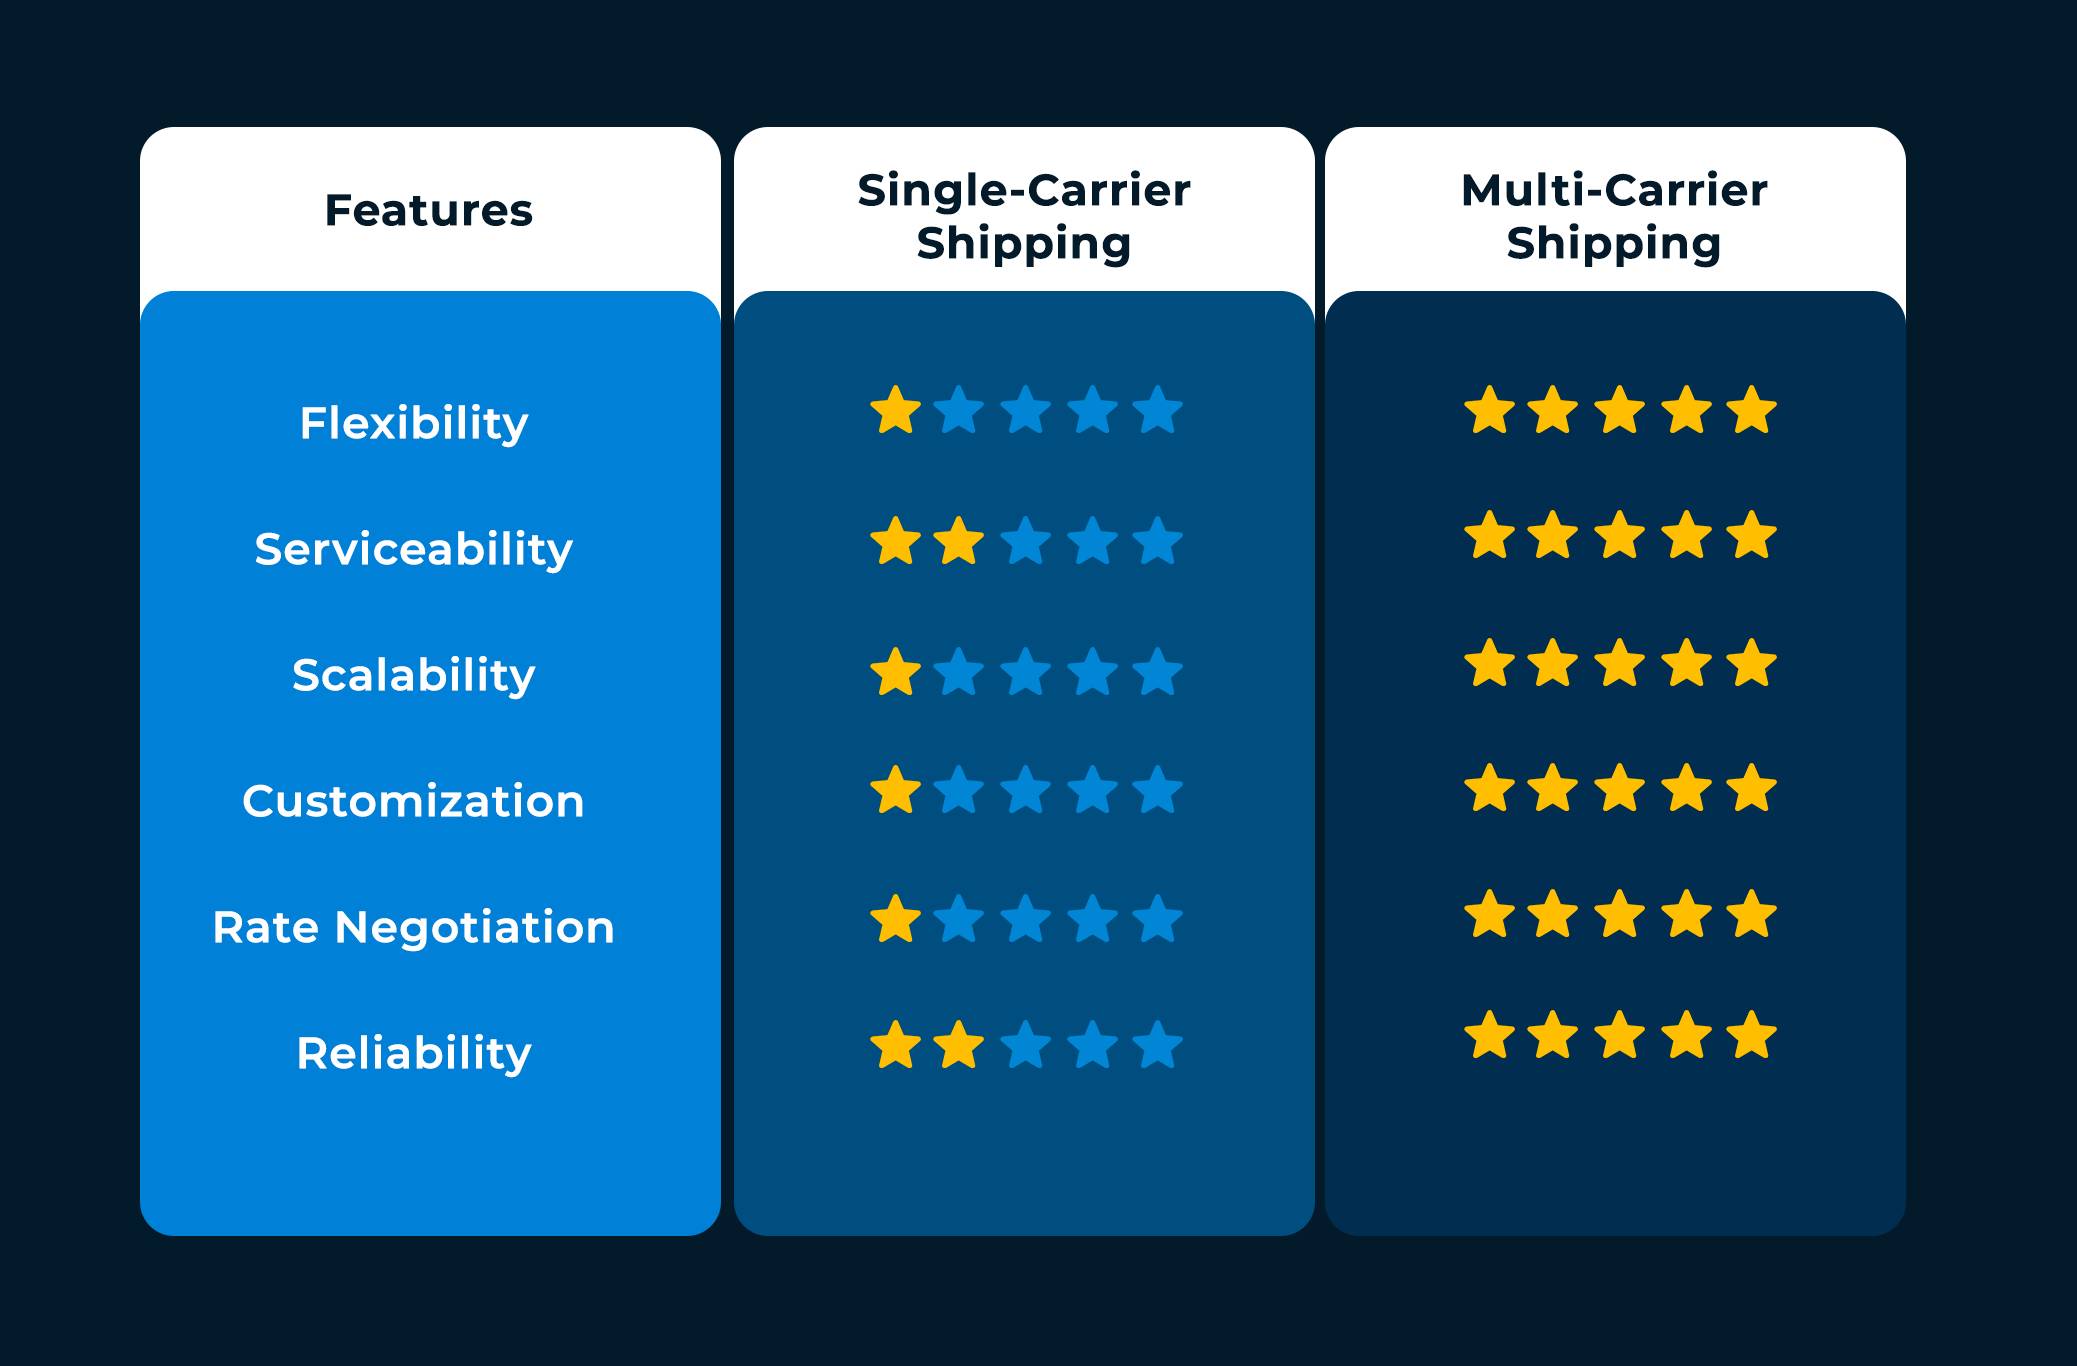 Logistics Management Software: Single-Carrier Shipping vs Multi-Carrier Shipping